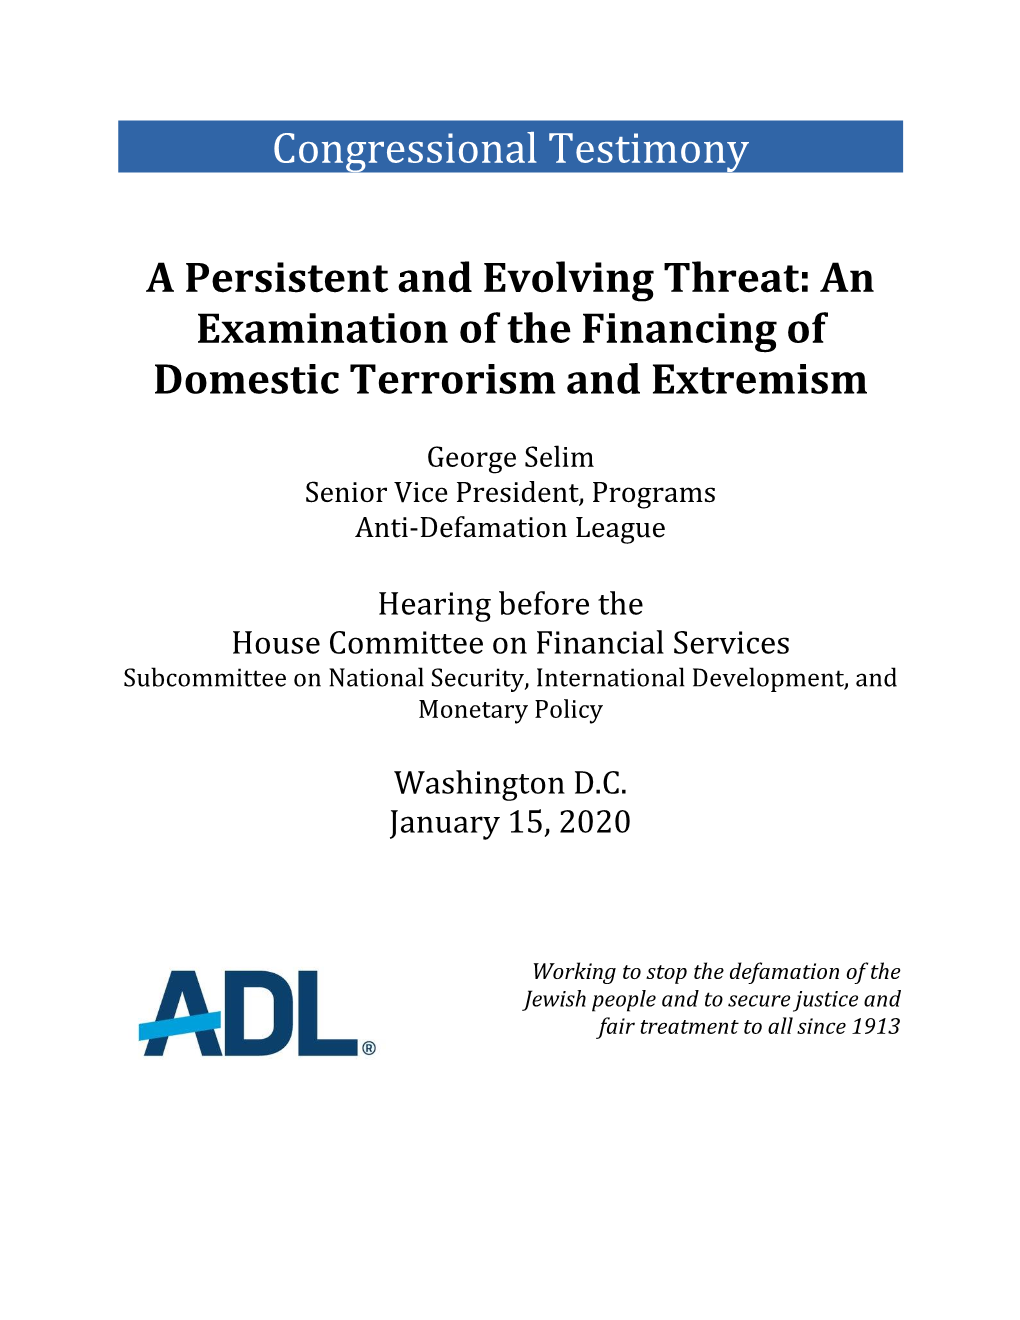 An Examination of the Financing of Domestic Terrorism and Extremism